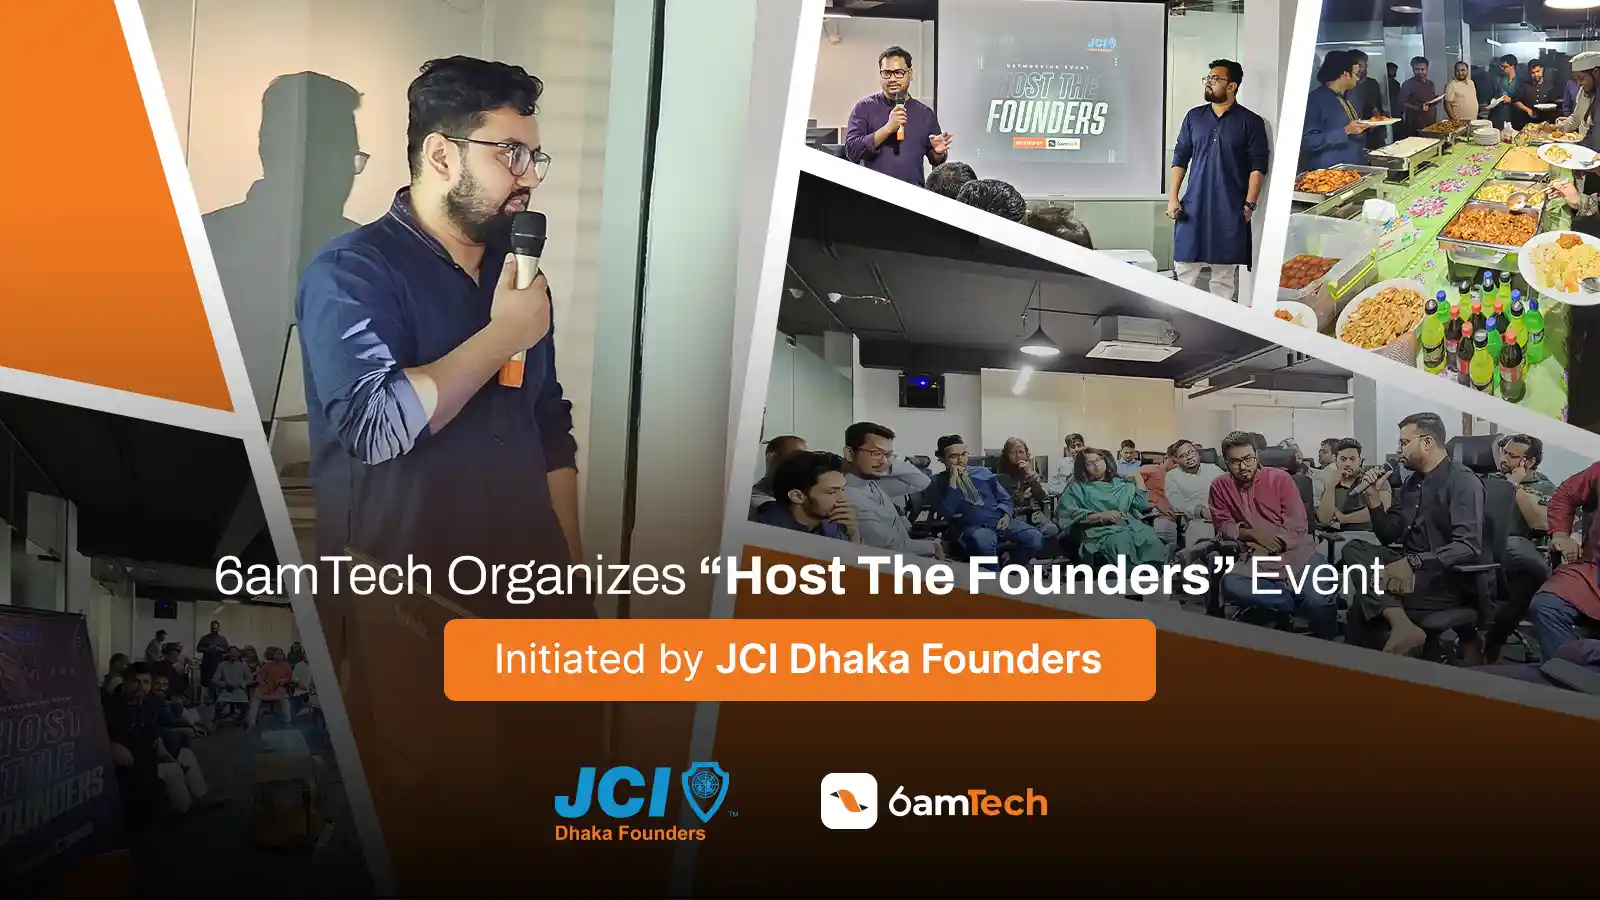 6amTech Organizes “Host The Founders” Event (Initiated by JCI Dhaka Founders)